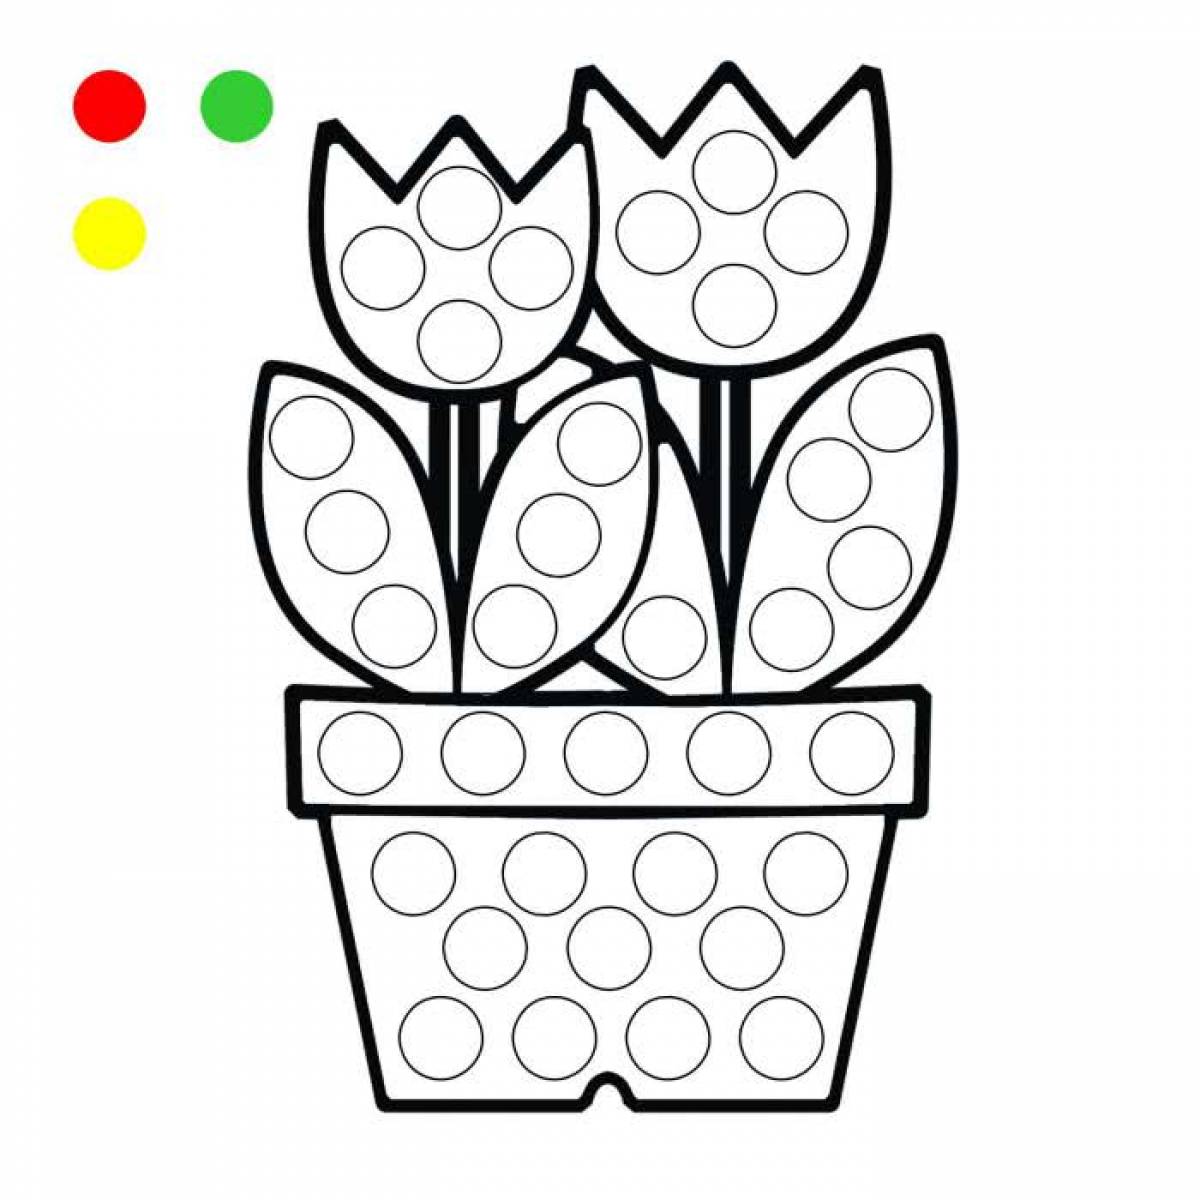 Coloring pages for fingers tulips